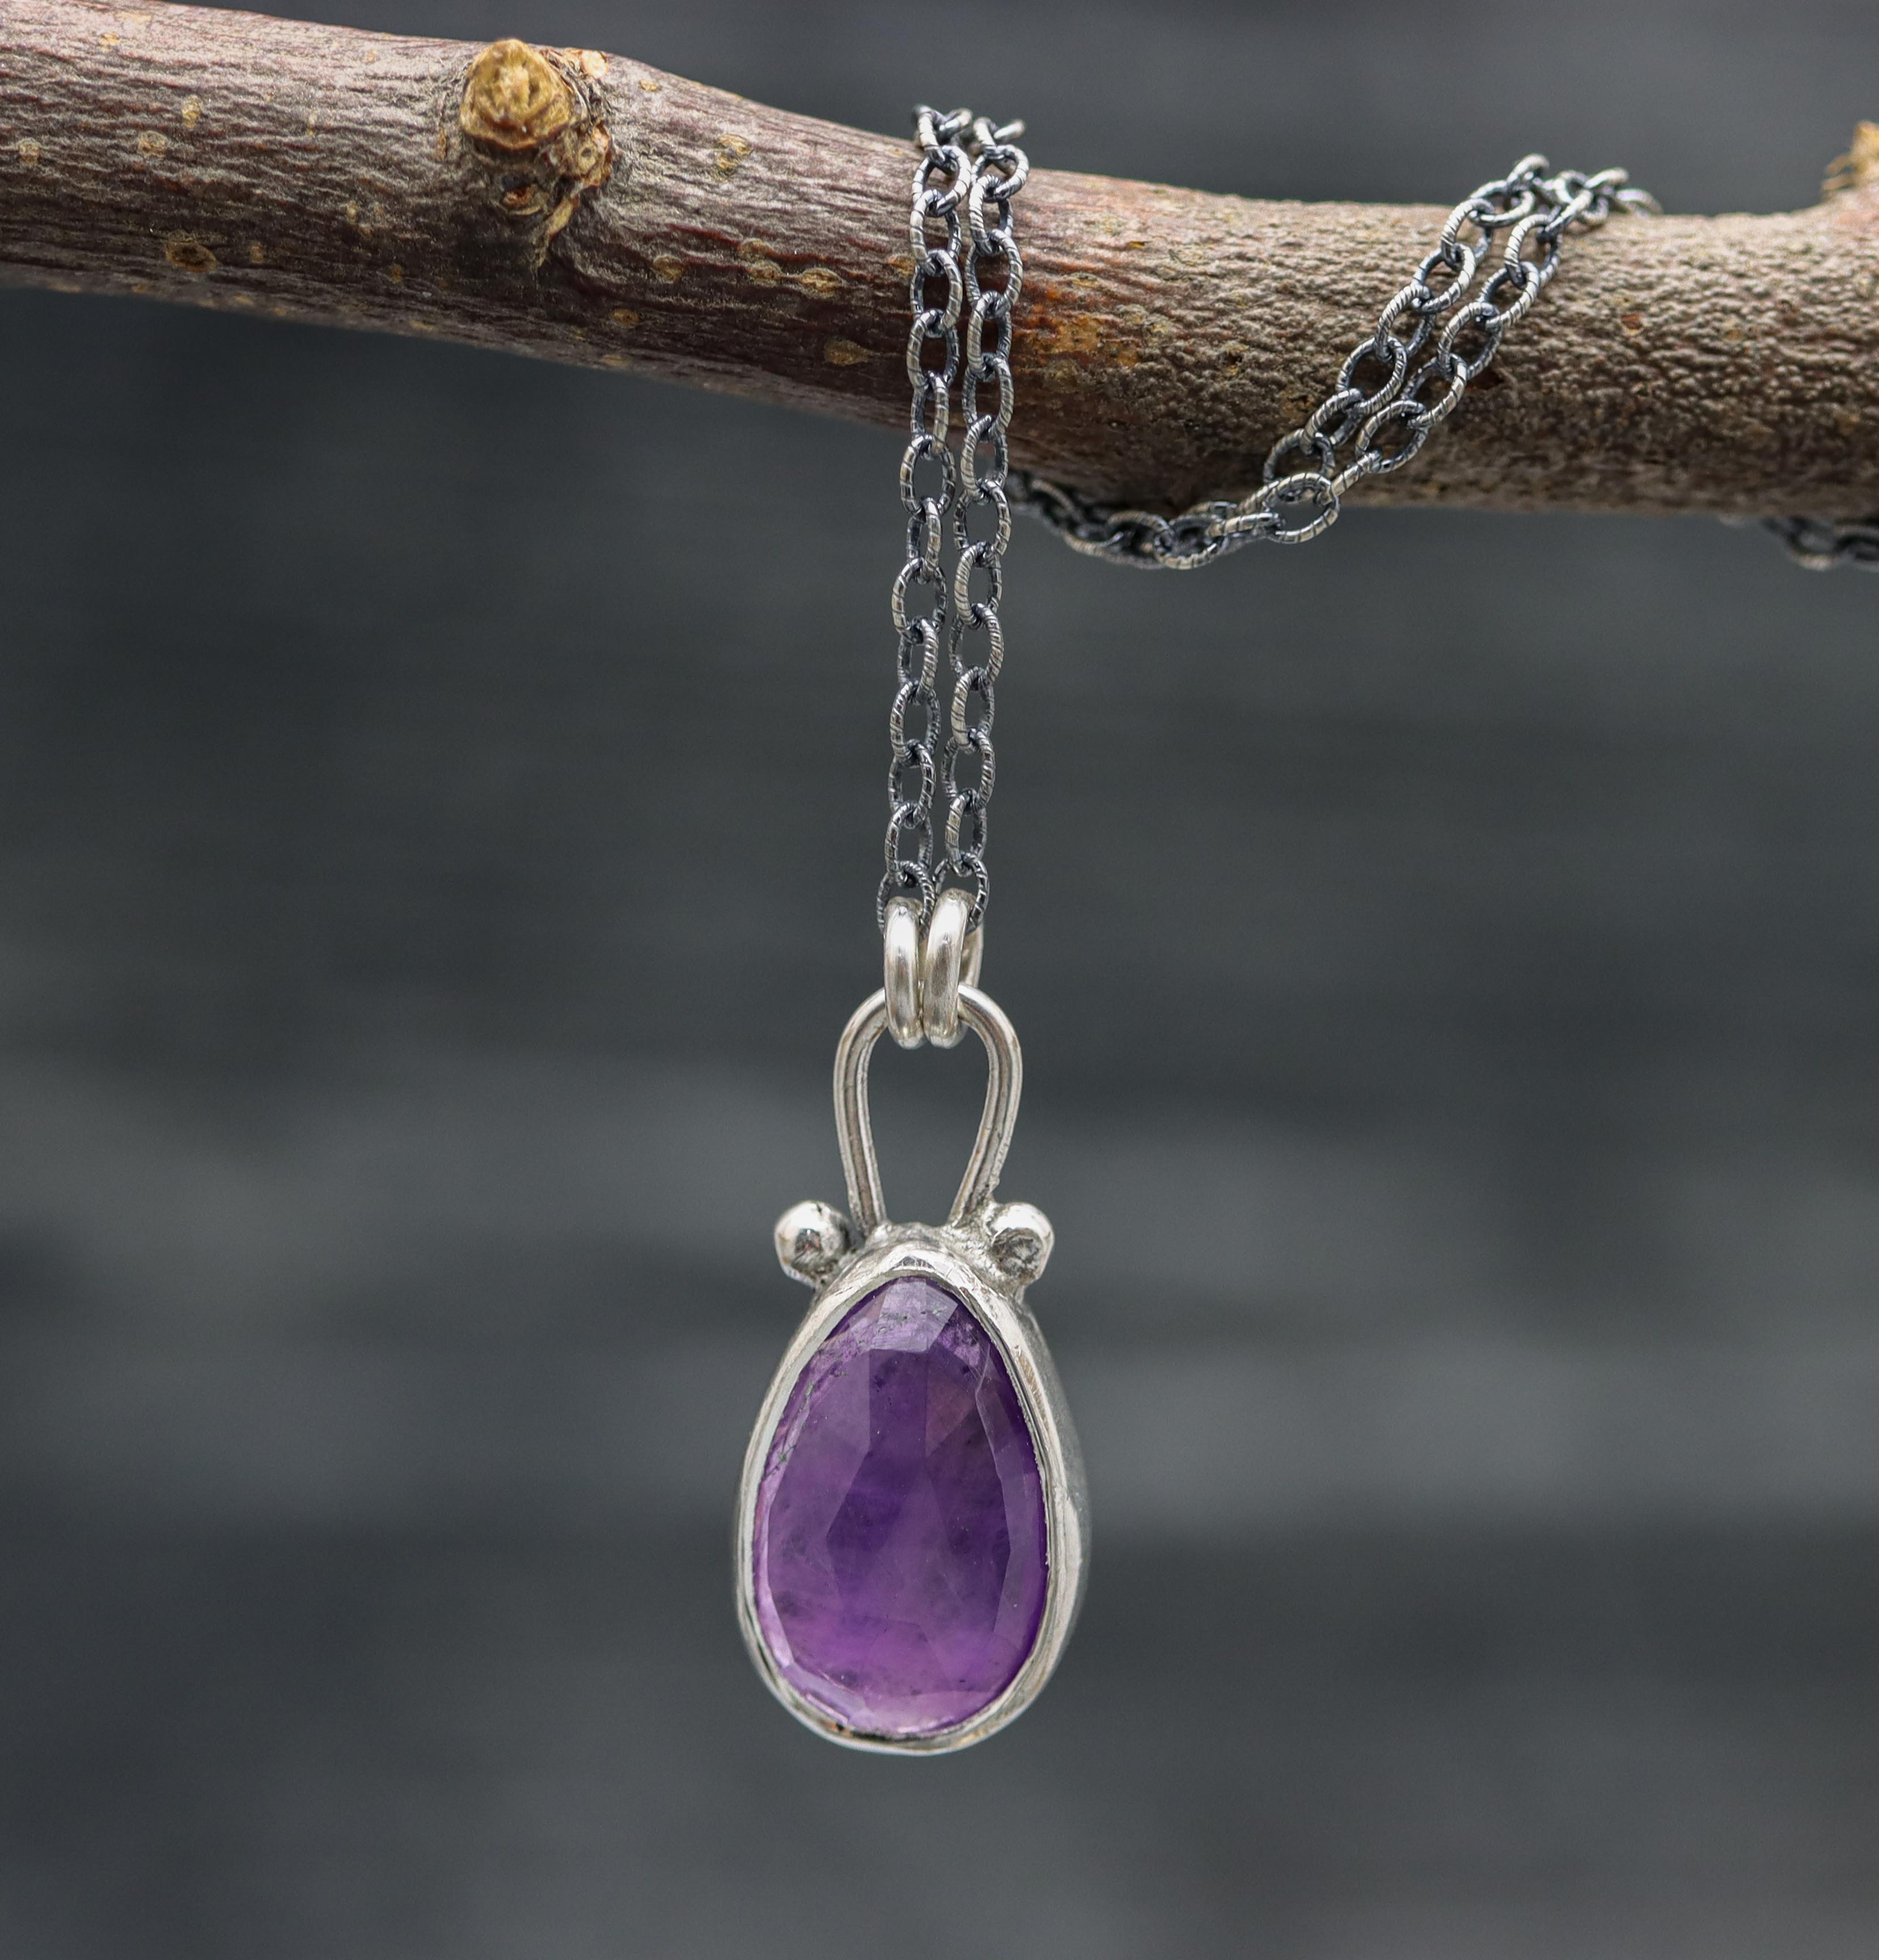 Amethyst Pendant Necklace Sterling Silver